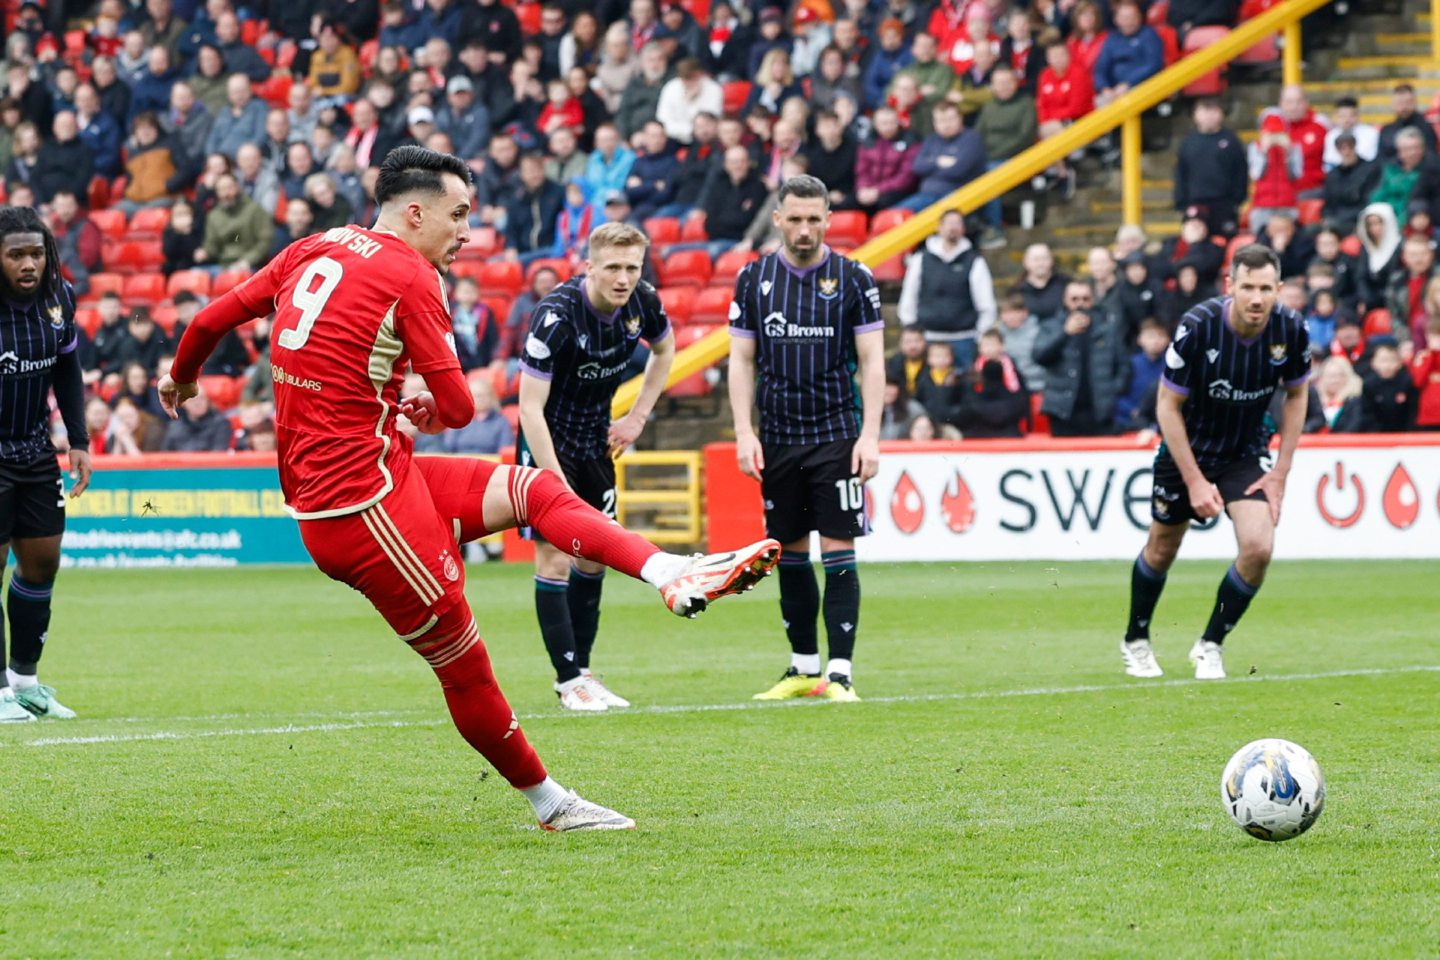 Bojan Miovski of Aberdeen scores a penalty kick against St Johnstone at Pittodrie. Image: Shutterstock